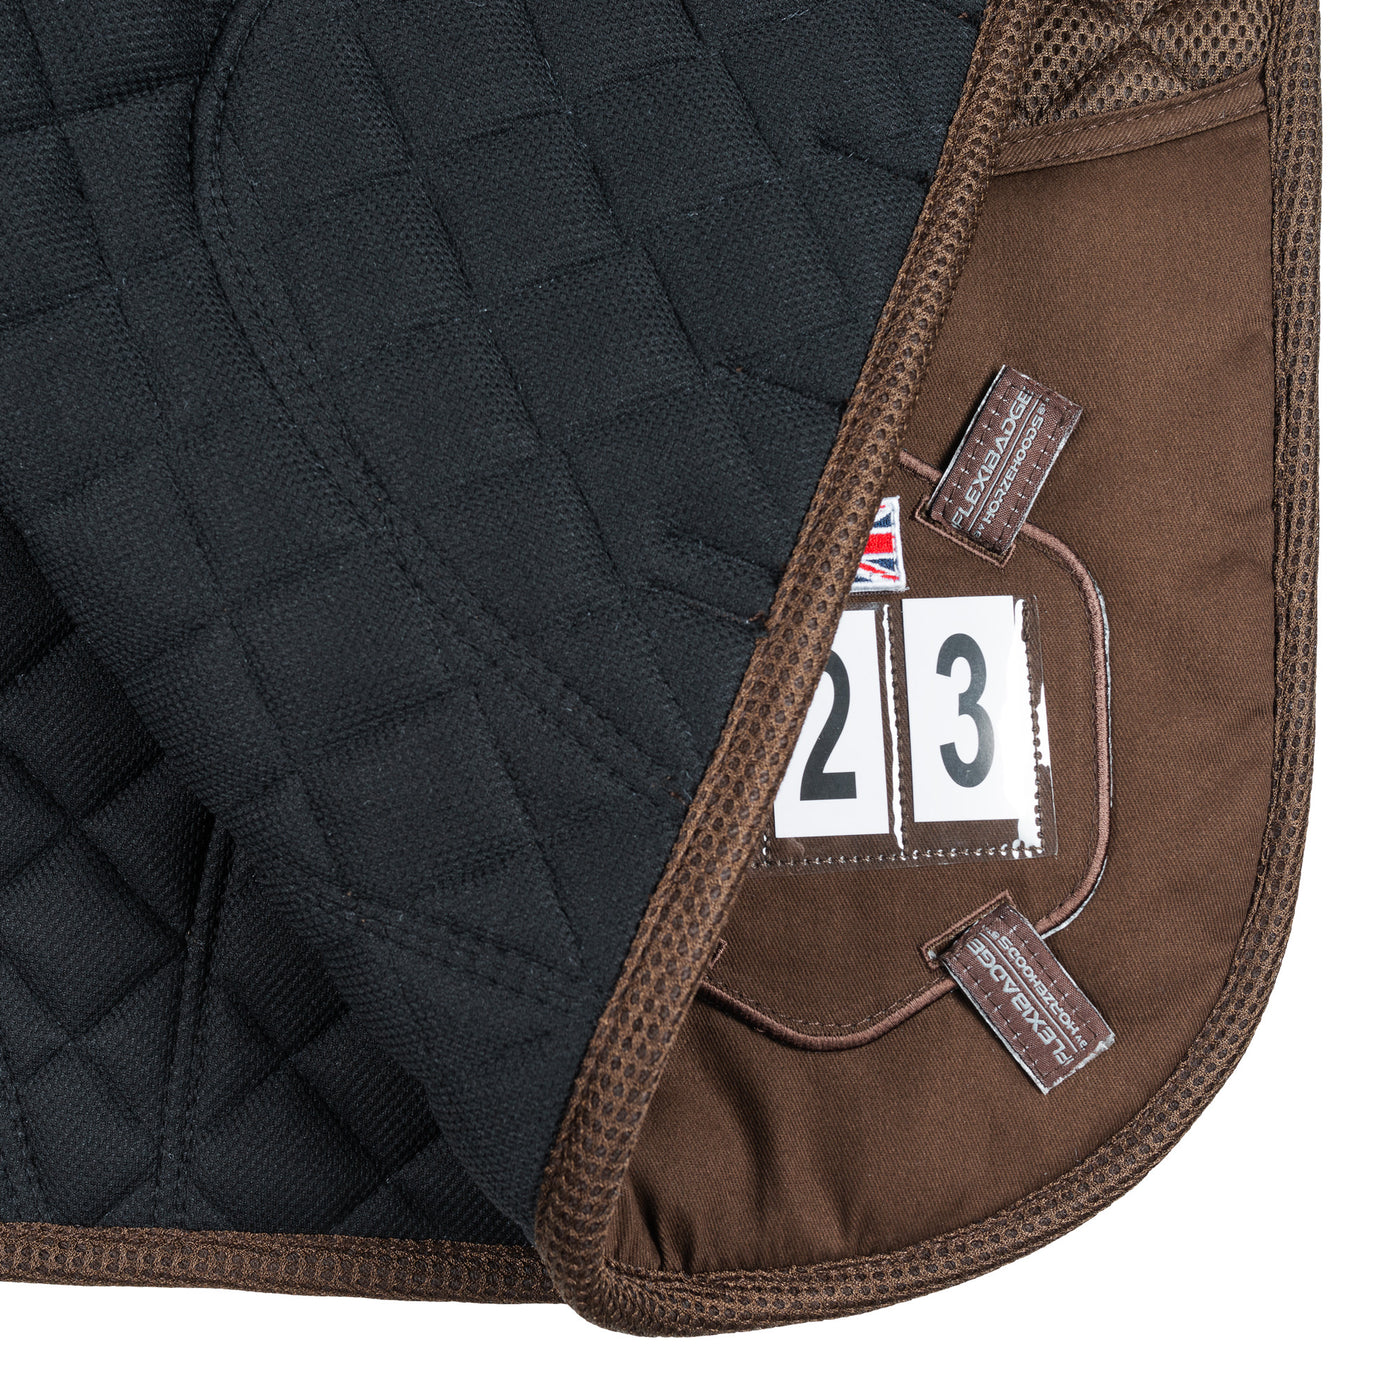 2-1 Brown Competition Dressage Pad & Kit